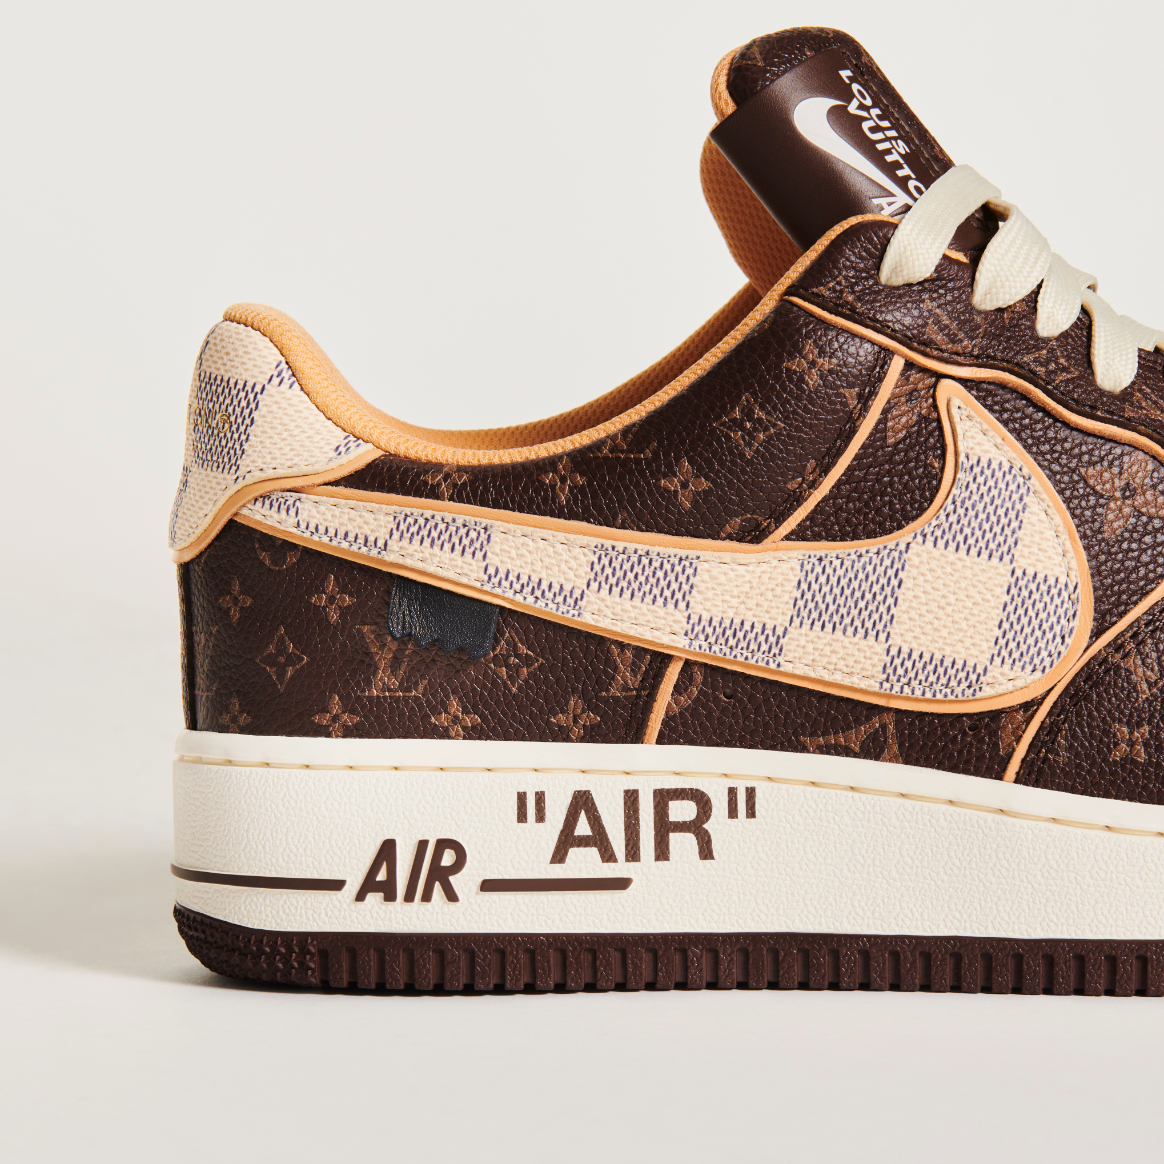 Louis Vuitton x Nike Air Force 1 arrive in retail  Montenapo Daily